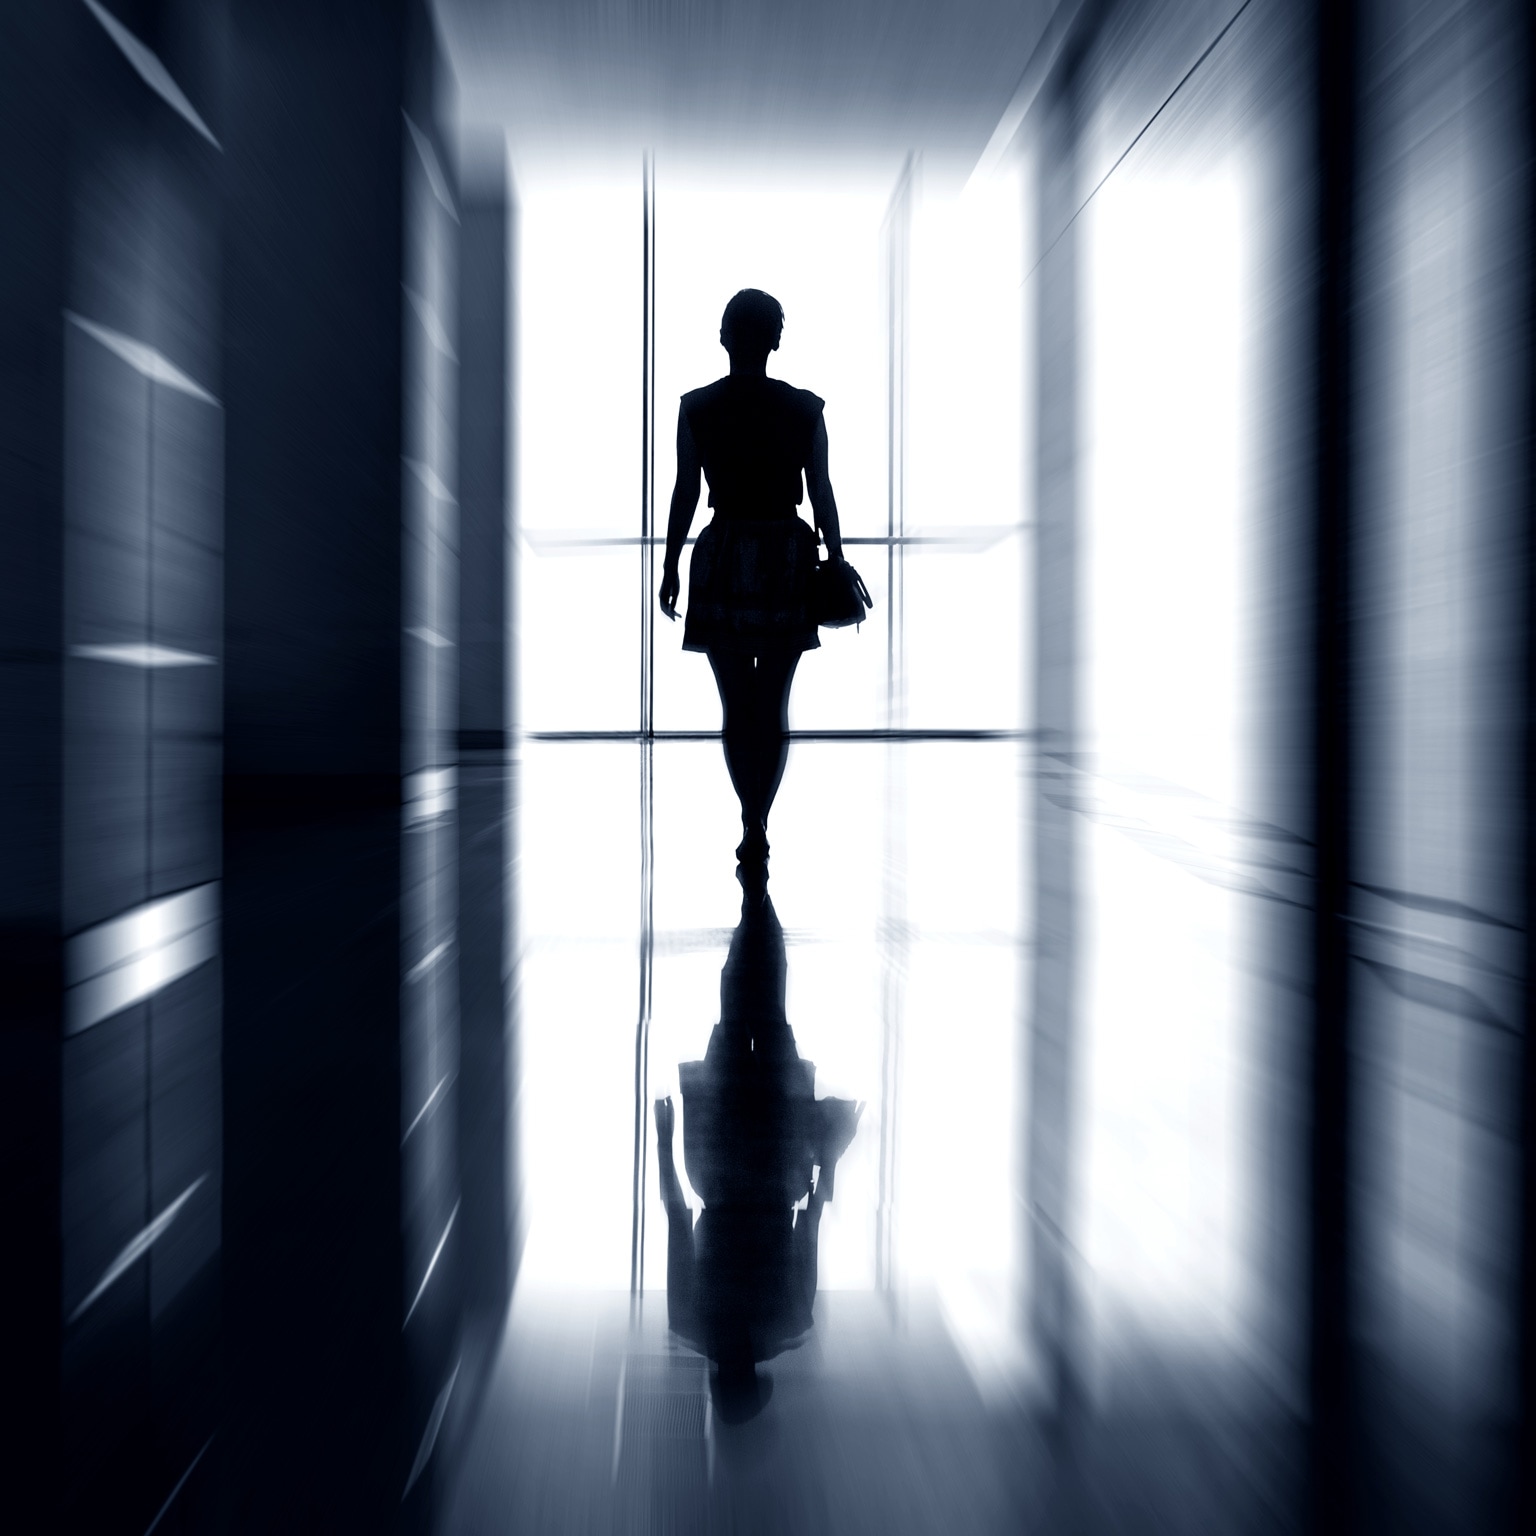 Silhouette of a woman walking away into the light down an office hallway